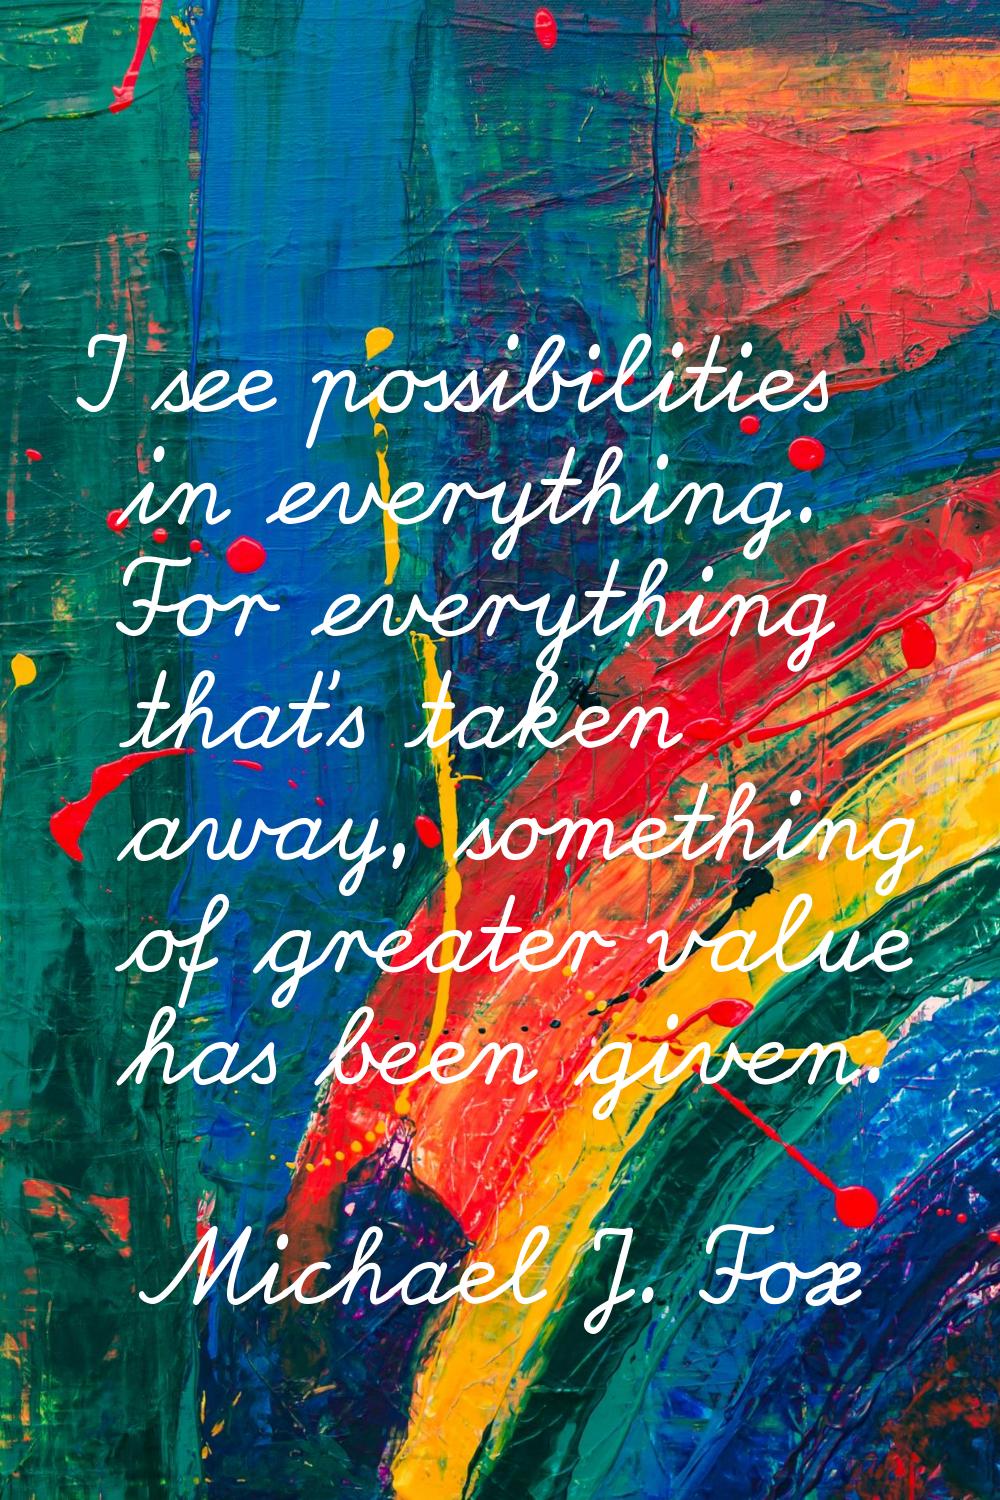 I see possibilities in everything. For everything that's taken away, something of greater value has